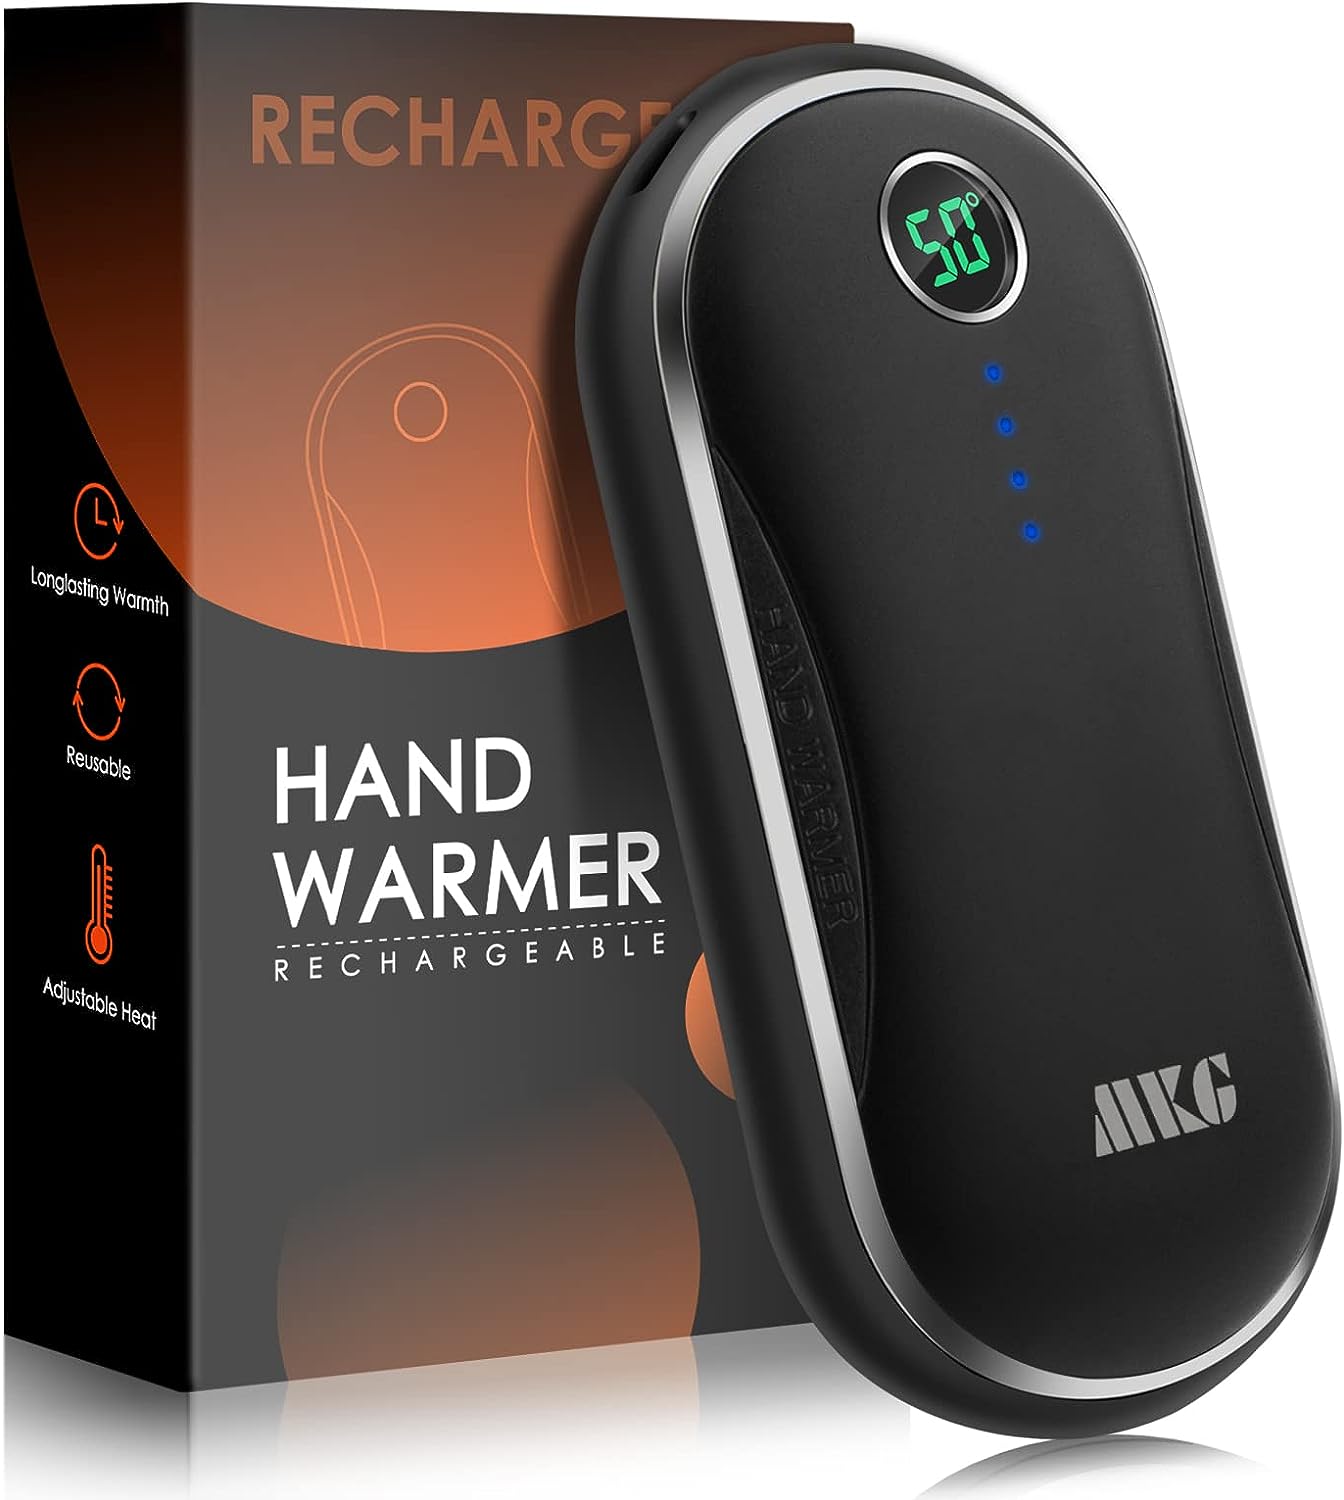 Hand Warmer Rechargeable, MKG 10000mAh Electric Handwarmers, 15 Hours Long Lasting and 3 Levels Quick Heating with Digital Display, Portable Pocket Hand Heater & Power Bank for Outdoor, Winter Gift